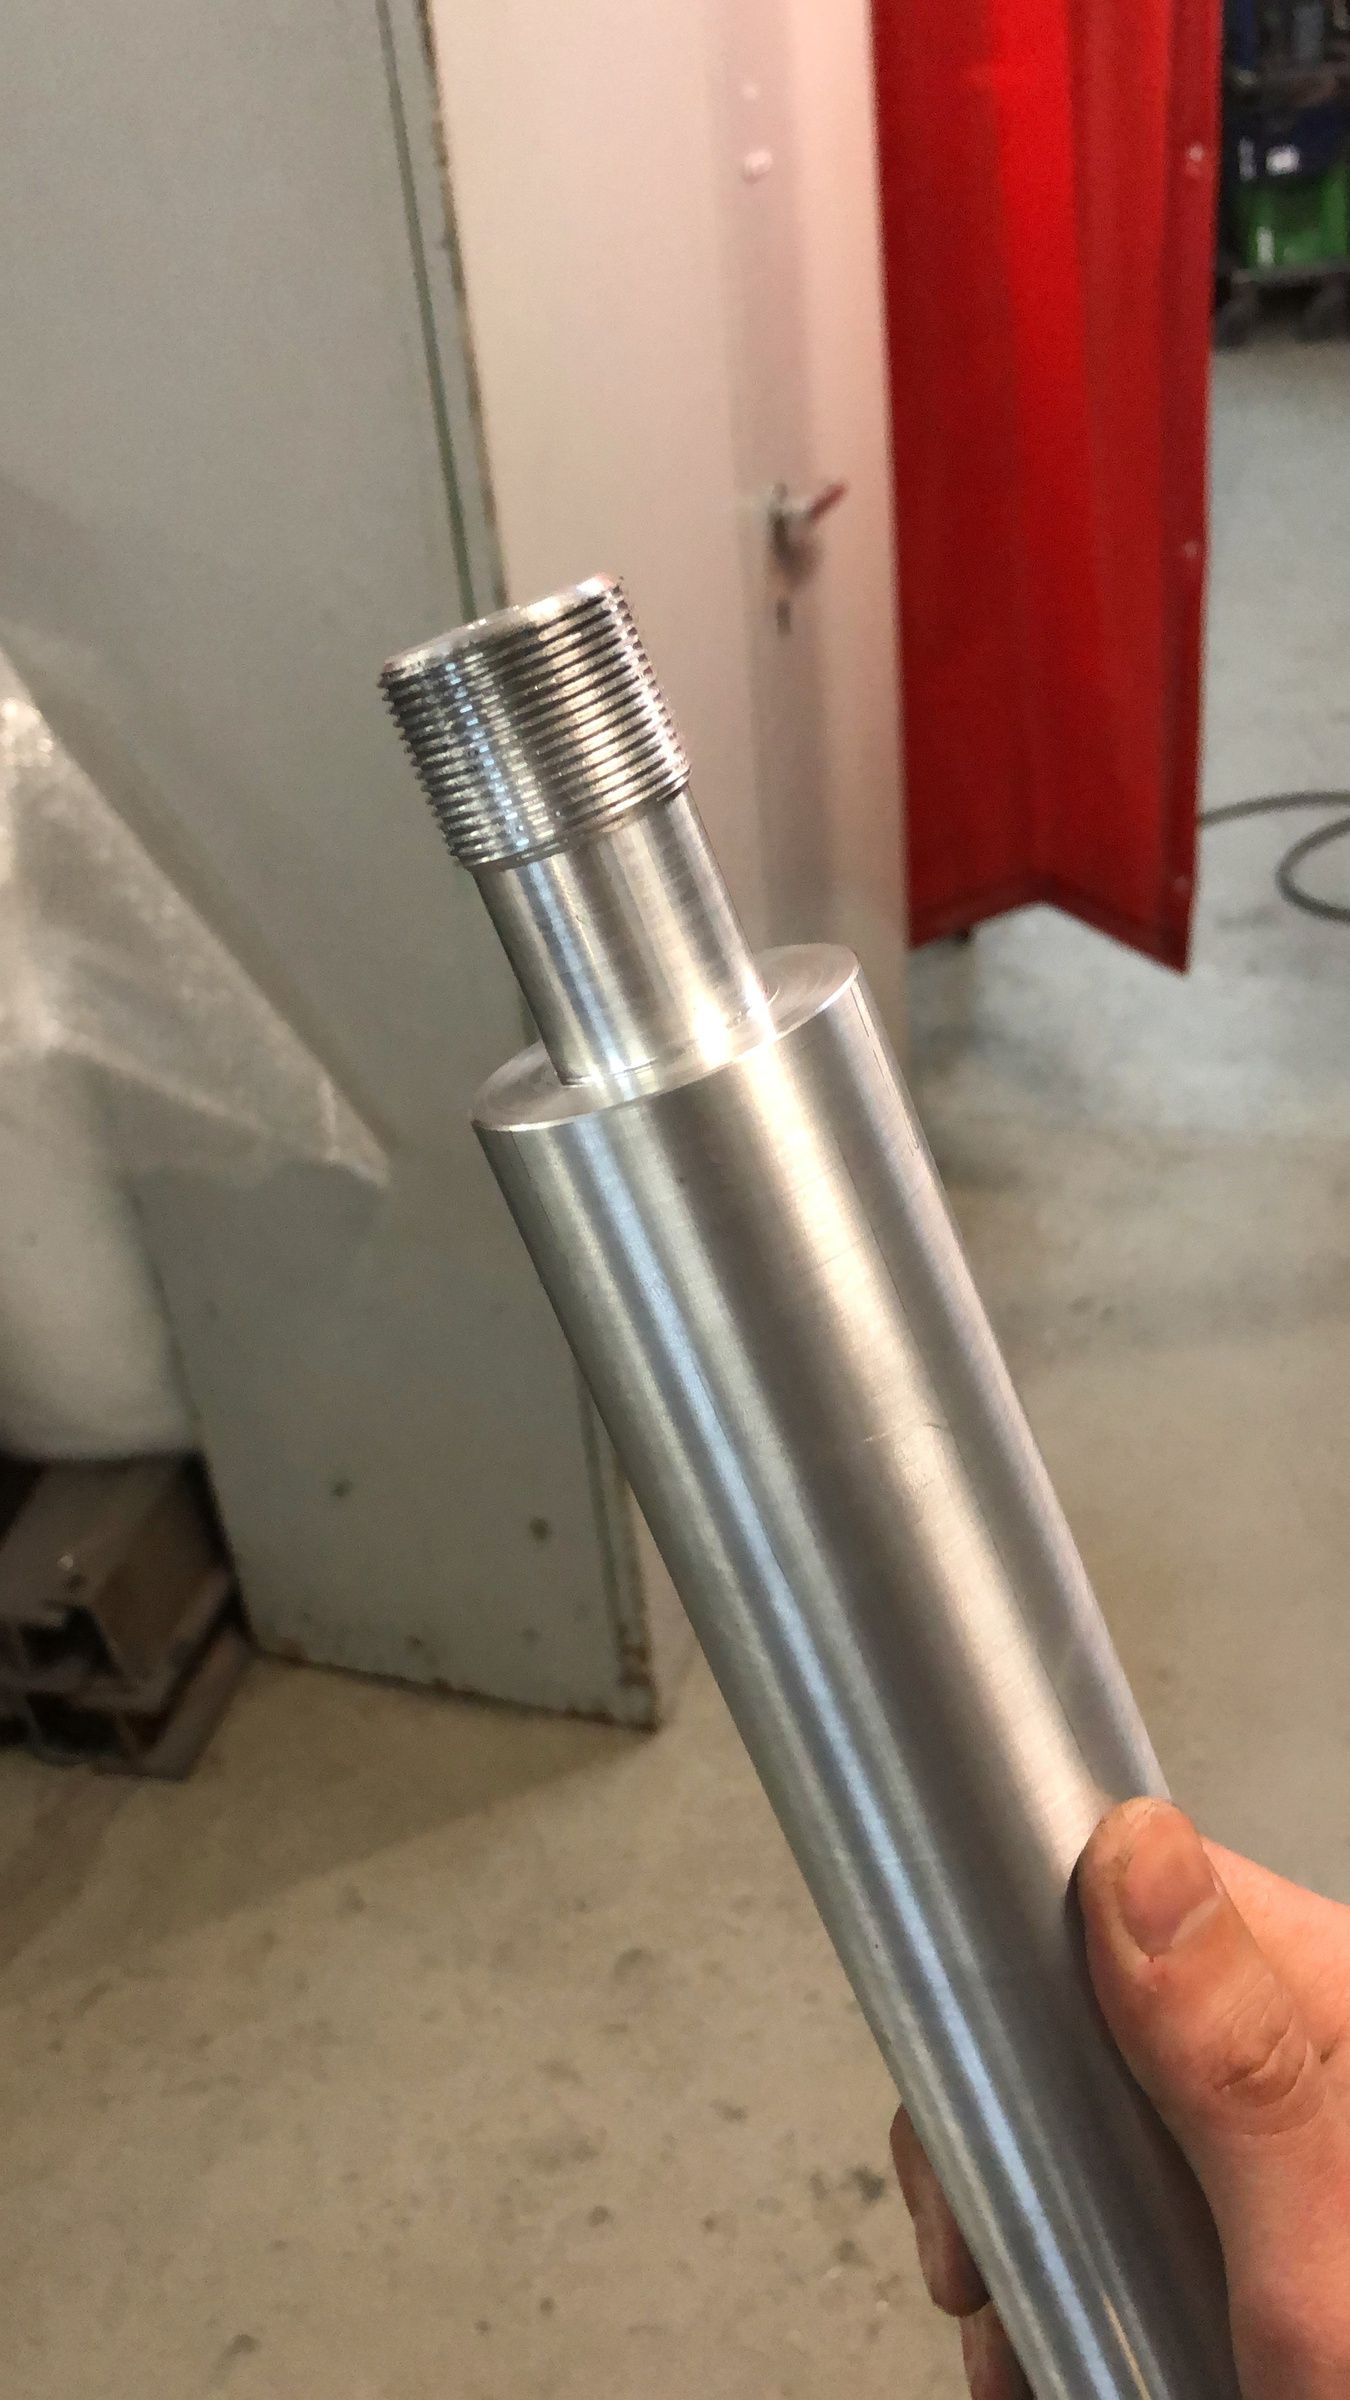 The final m30x1.5 thread in the aluminium rod turned out great, considering the fact, that the lathe was manually operated and not a CNC lathe.